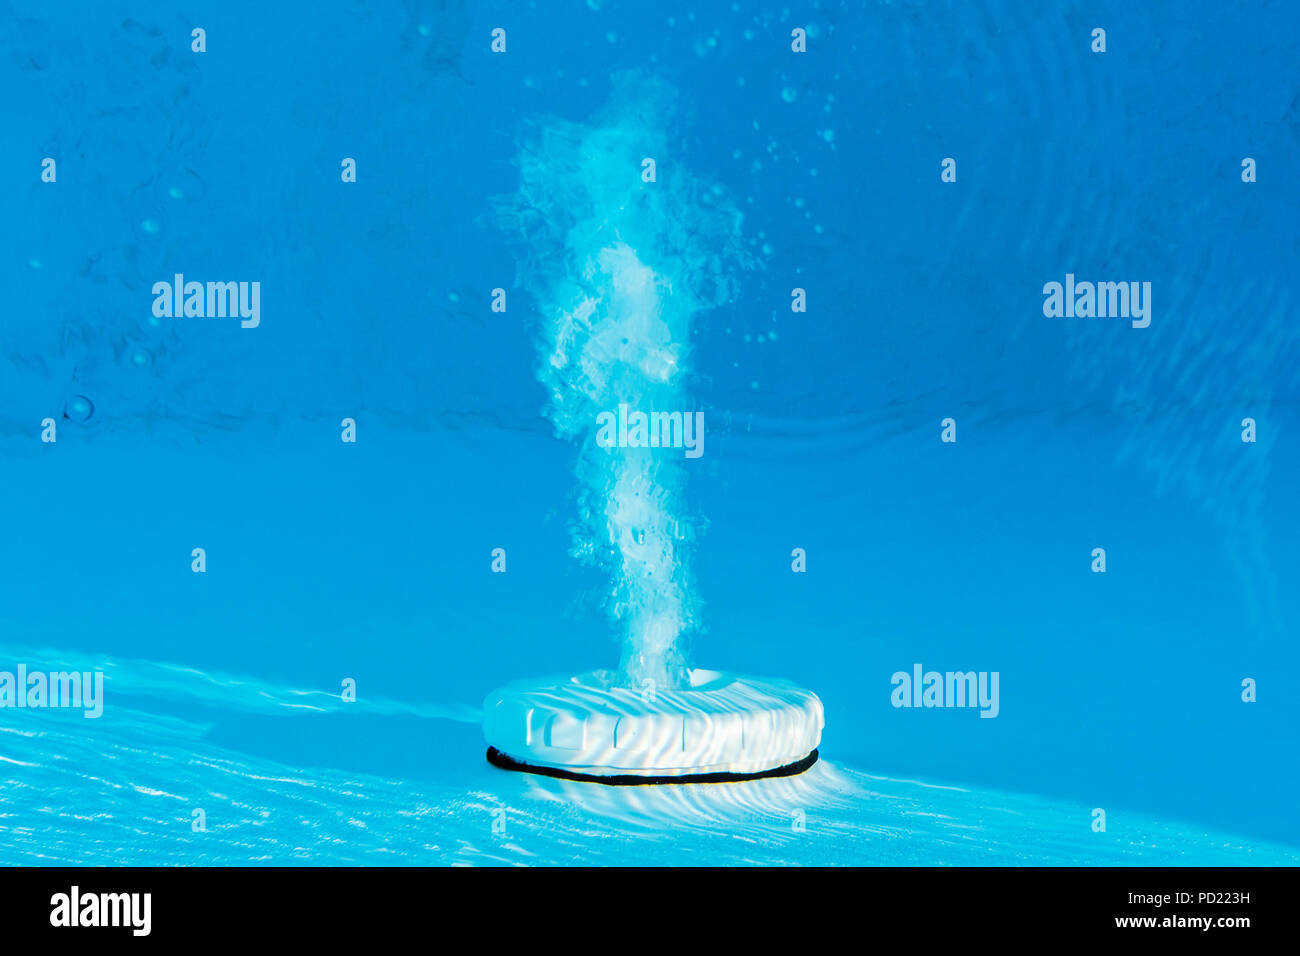 Top view of an active underwater discharge nozzle filtration system set in a blue liner swimming pool. Stock Photo